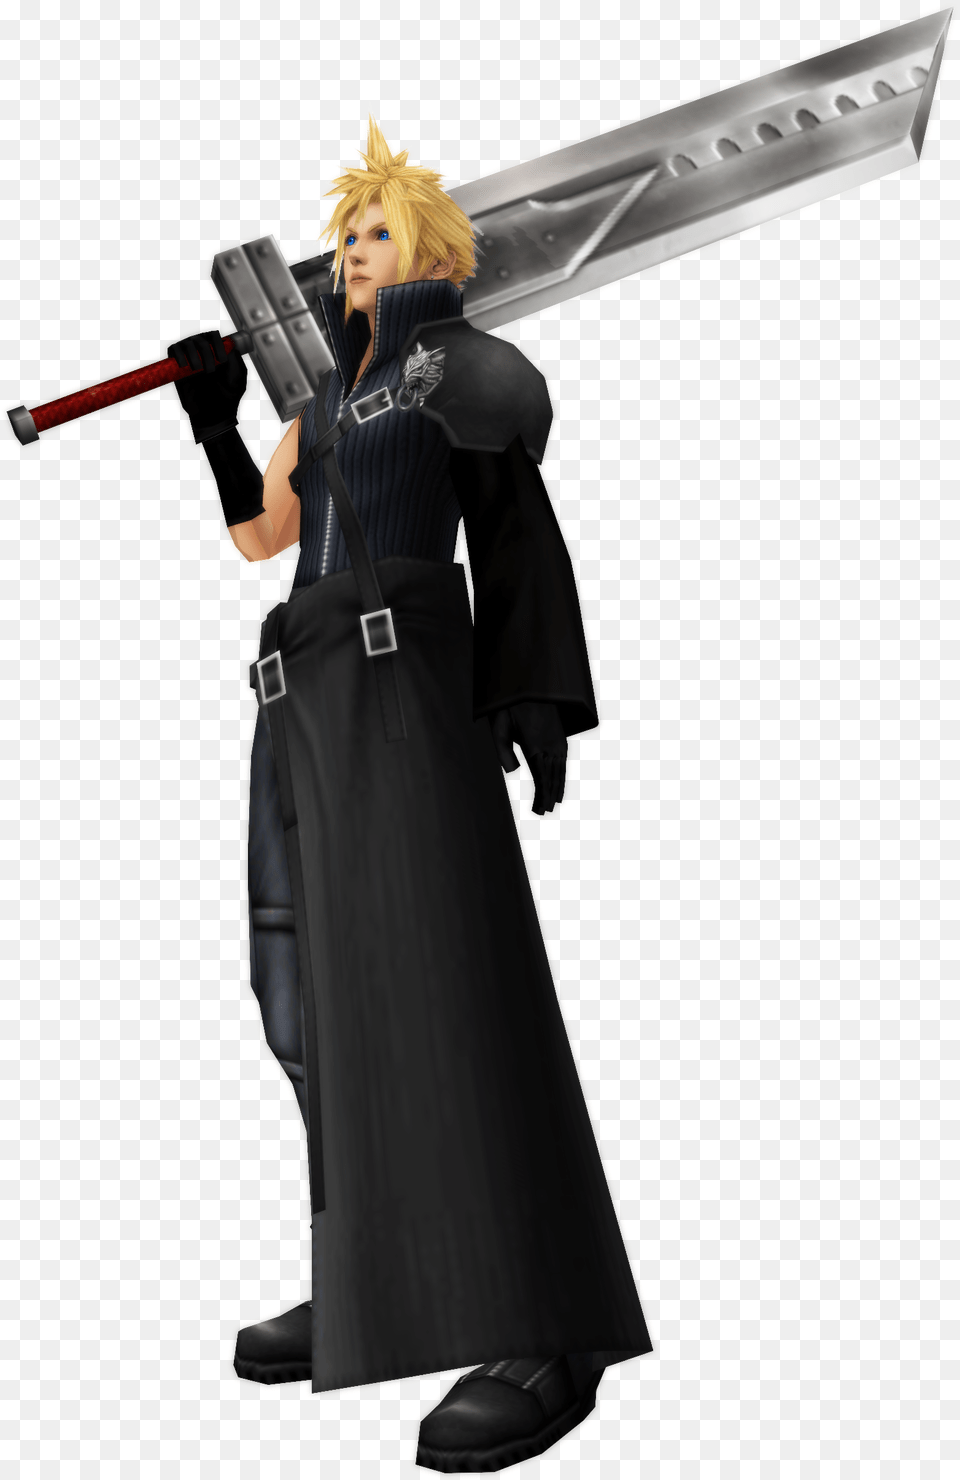 Cloud Strife Transparent Cloud Strife, Clothing, Costume, Weapon, Sword Png